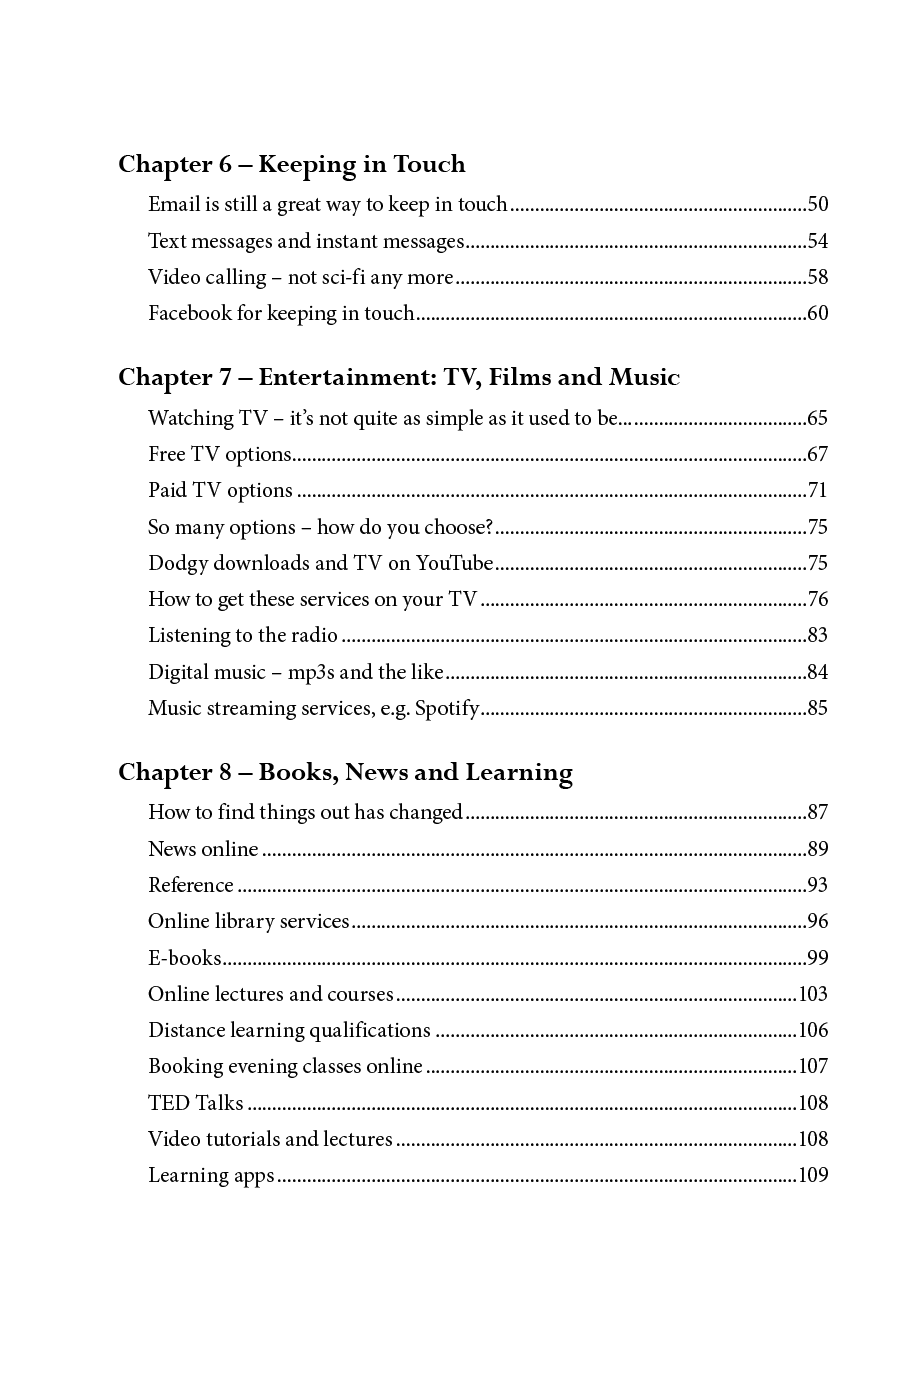 Survive and Thrive in the Digital Age Contents page